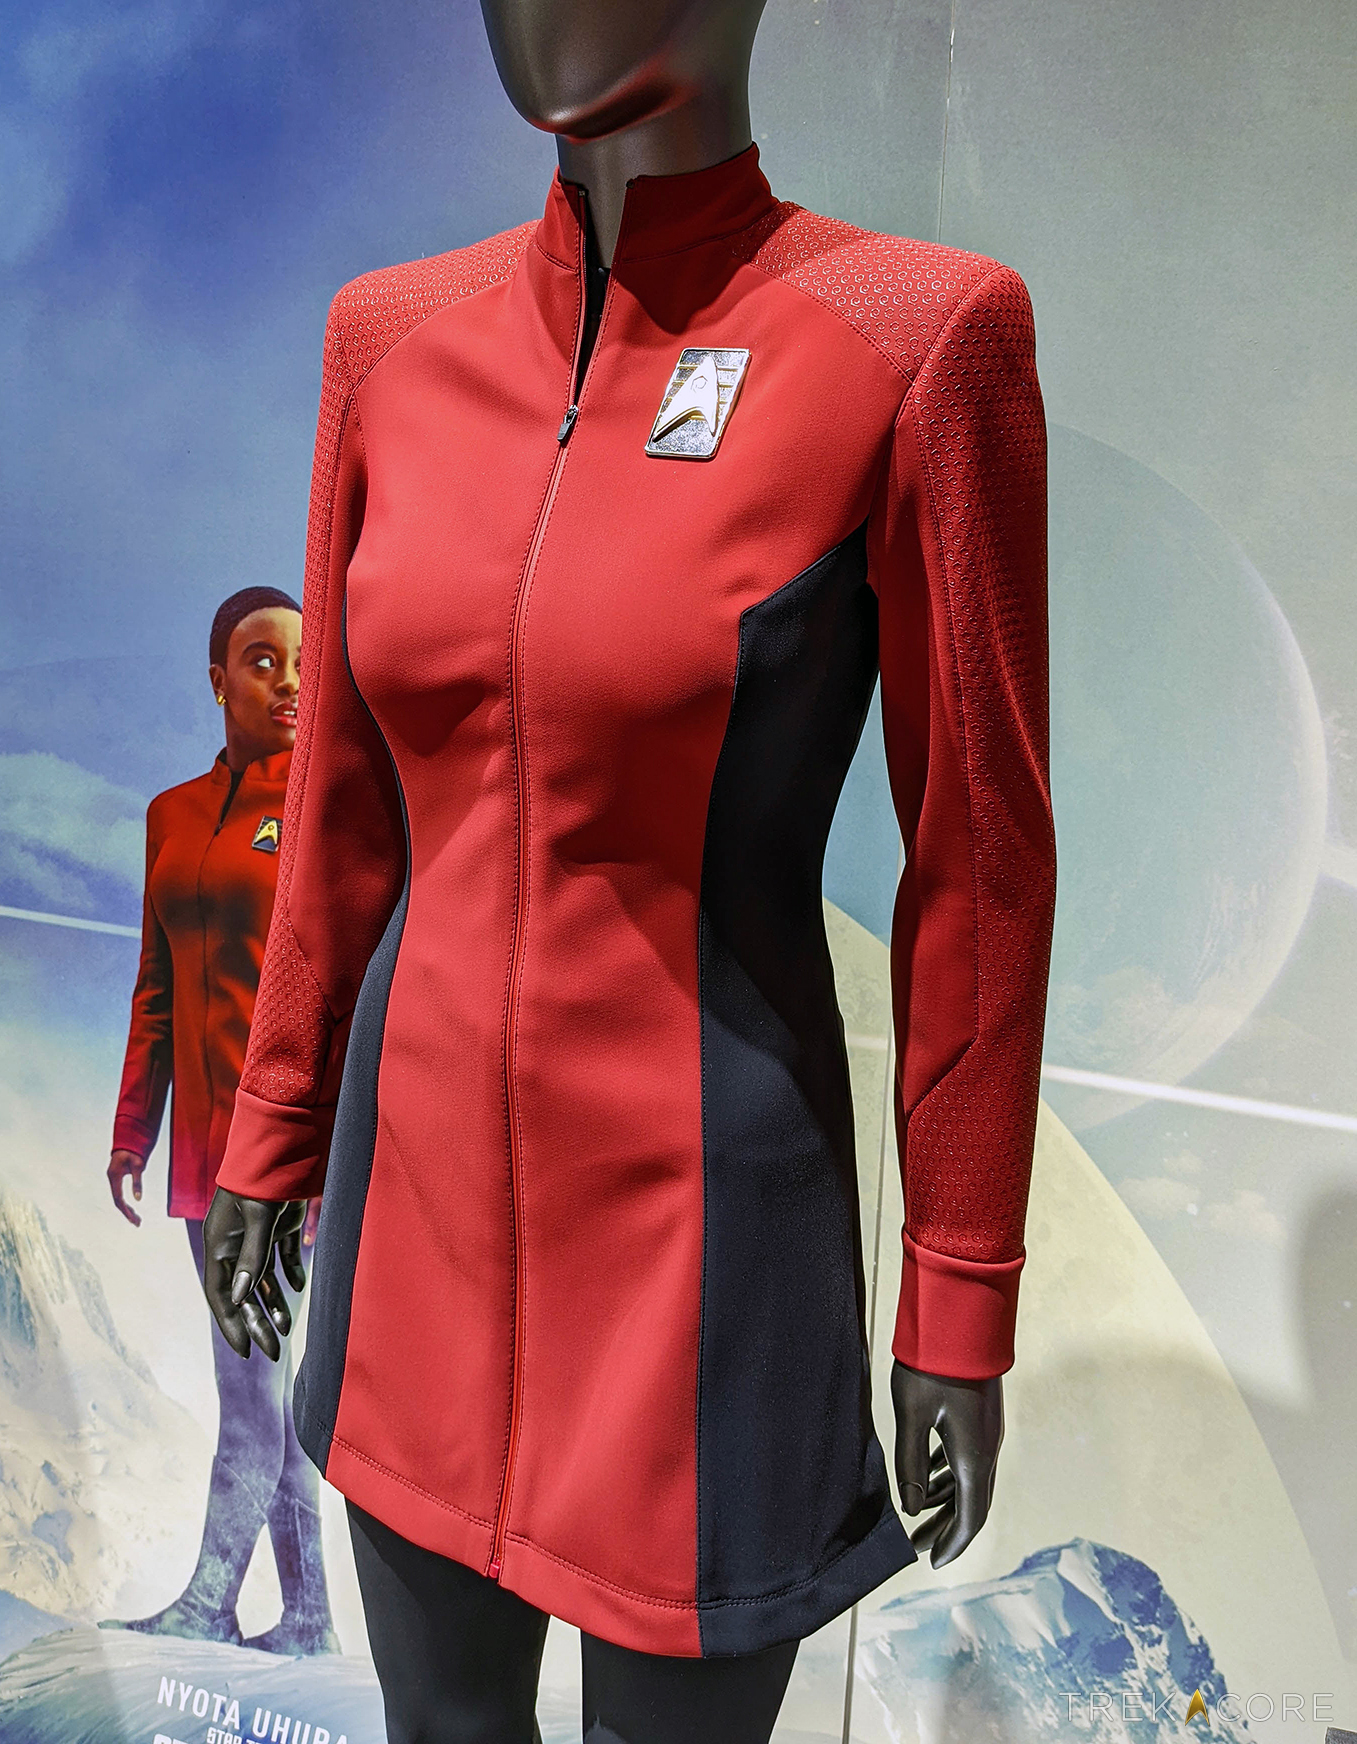 STAR TREK: DISCOVERY Prop and Costume Auction Set for September, Featuring  200+ Items from Season 1 and 2 • TrekCore.com